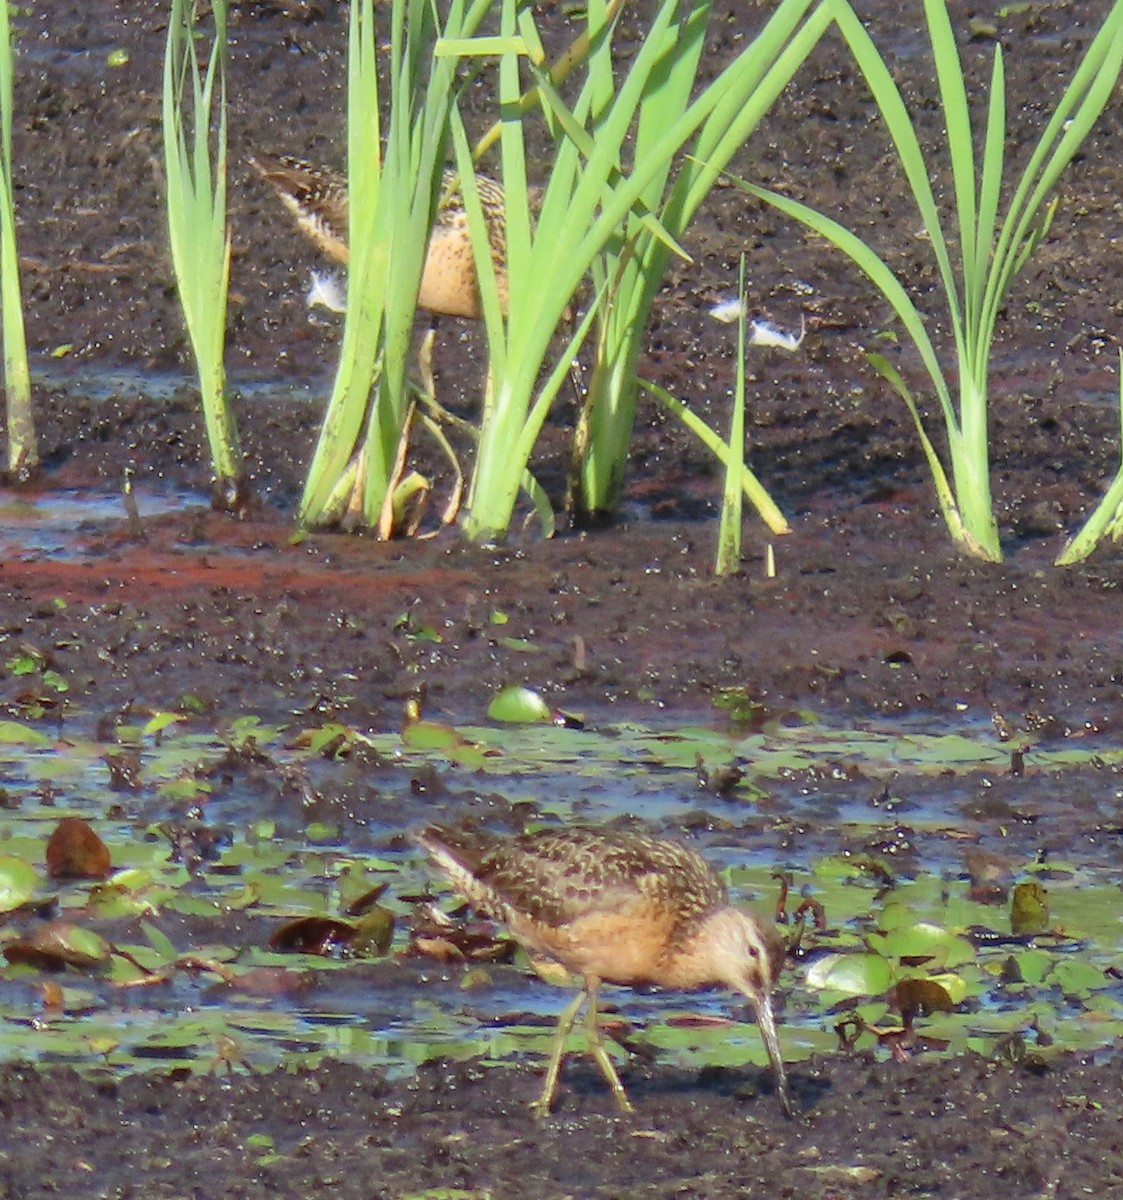 Long-billed Dowitcher - b haley